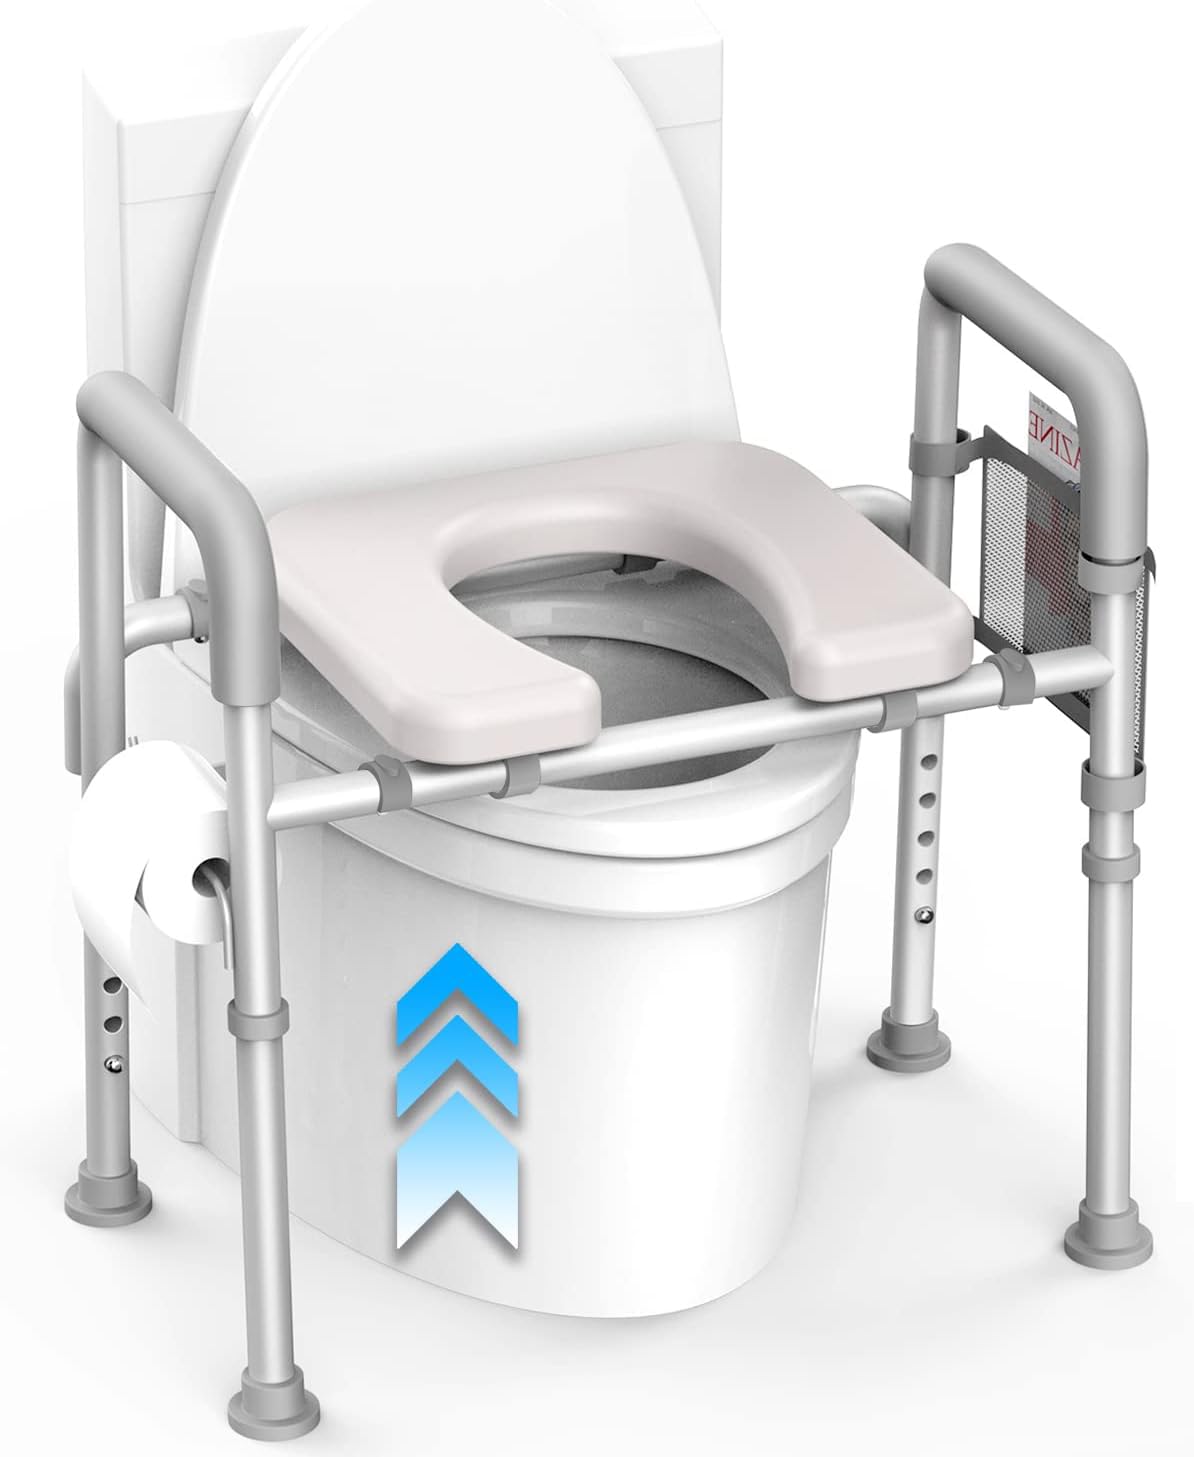 Buy AGRISH Raised Toilet Seat with Handles - Cozy Padded Elevated Medical  Commode w/Storage Bag & Paper Holder - 350lb Adjustable Safety Assist  Shower Chair for Elderly, Handicap, Pregnant